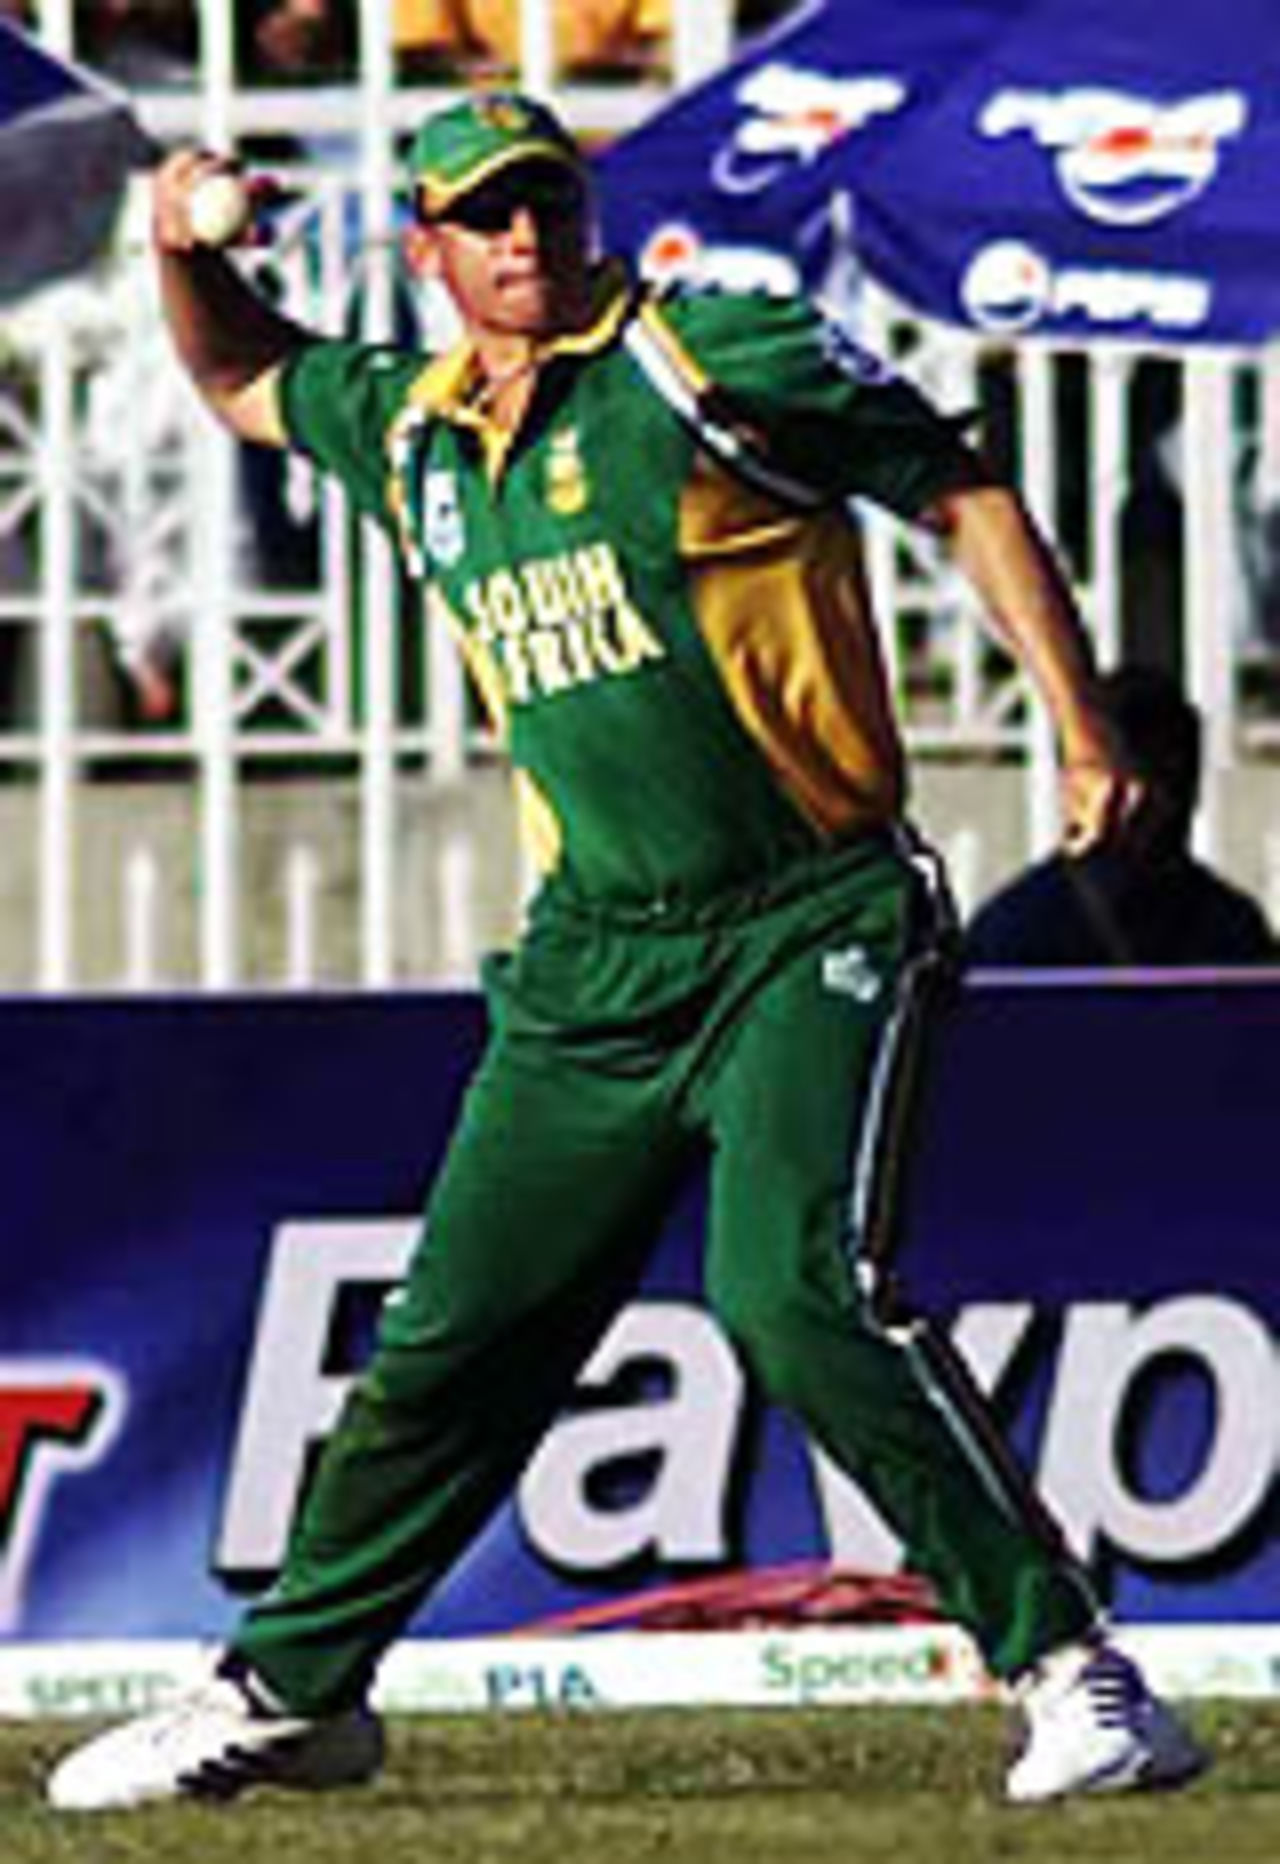 Herschelle Gibbs ready to throw from the boundary, Pakistan v South Africa, 5th ODI, Rawalpindi, October 12, 2003.